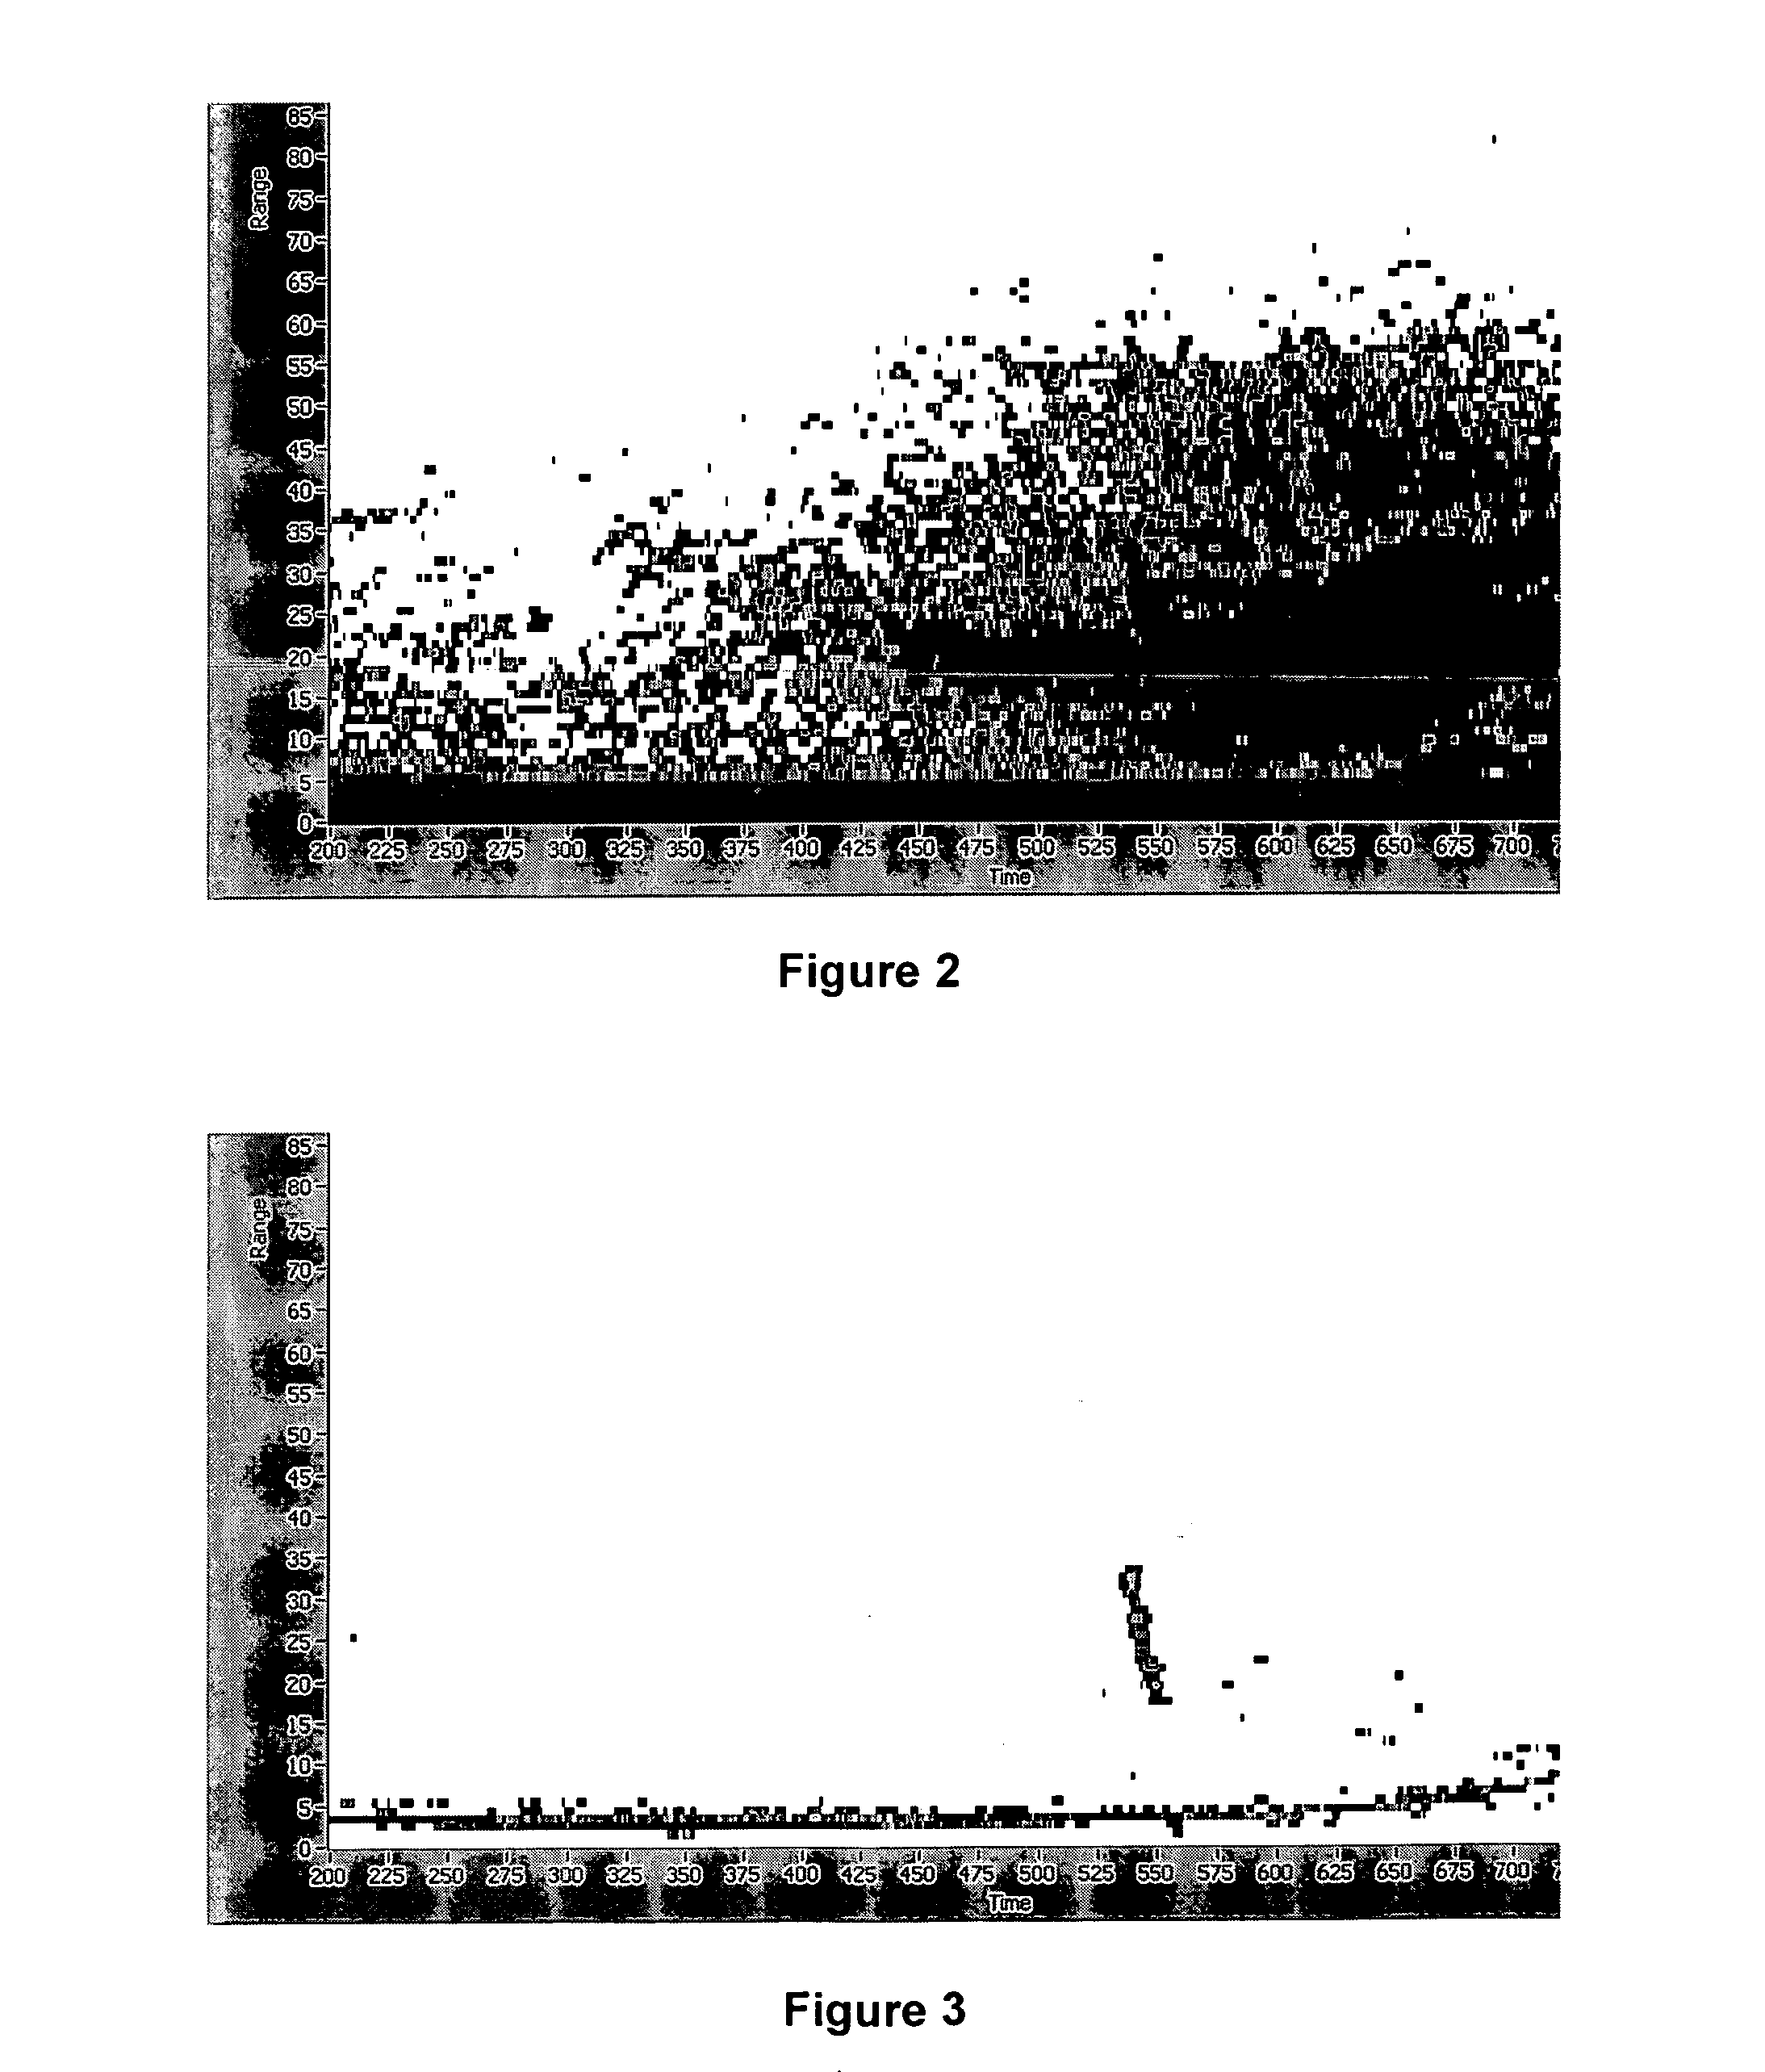 System for enhanced detection of a target